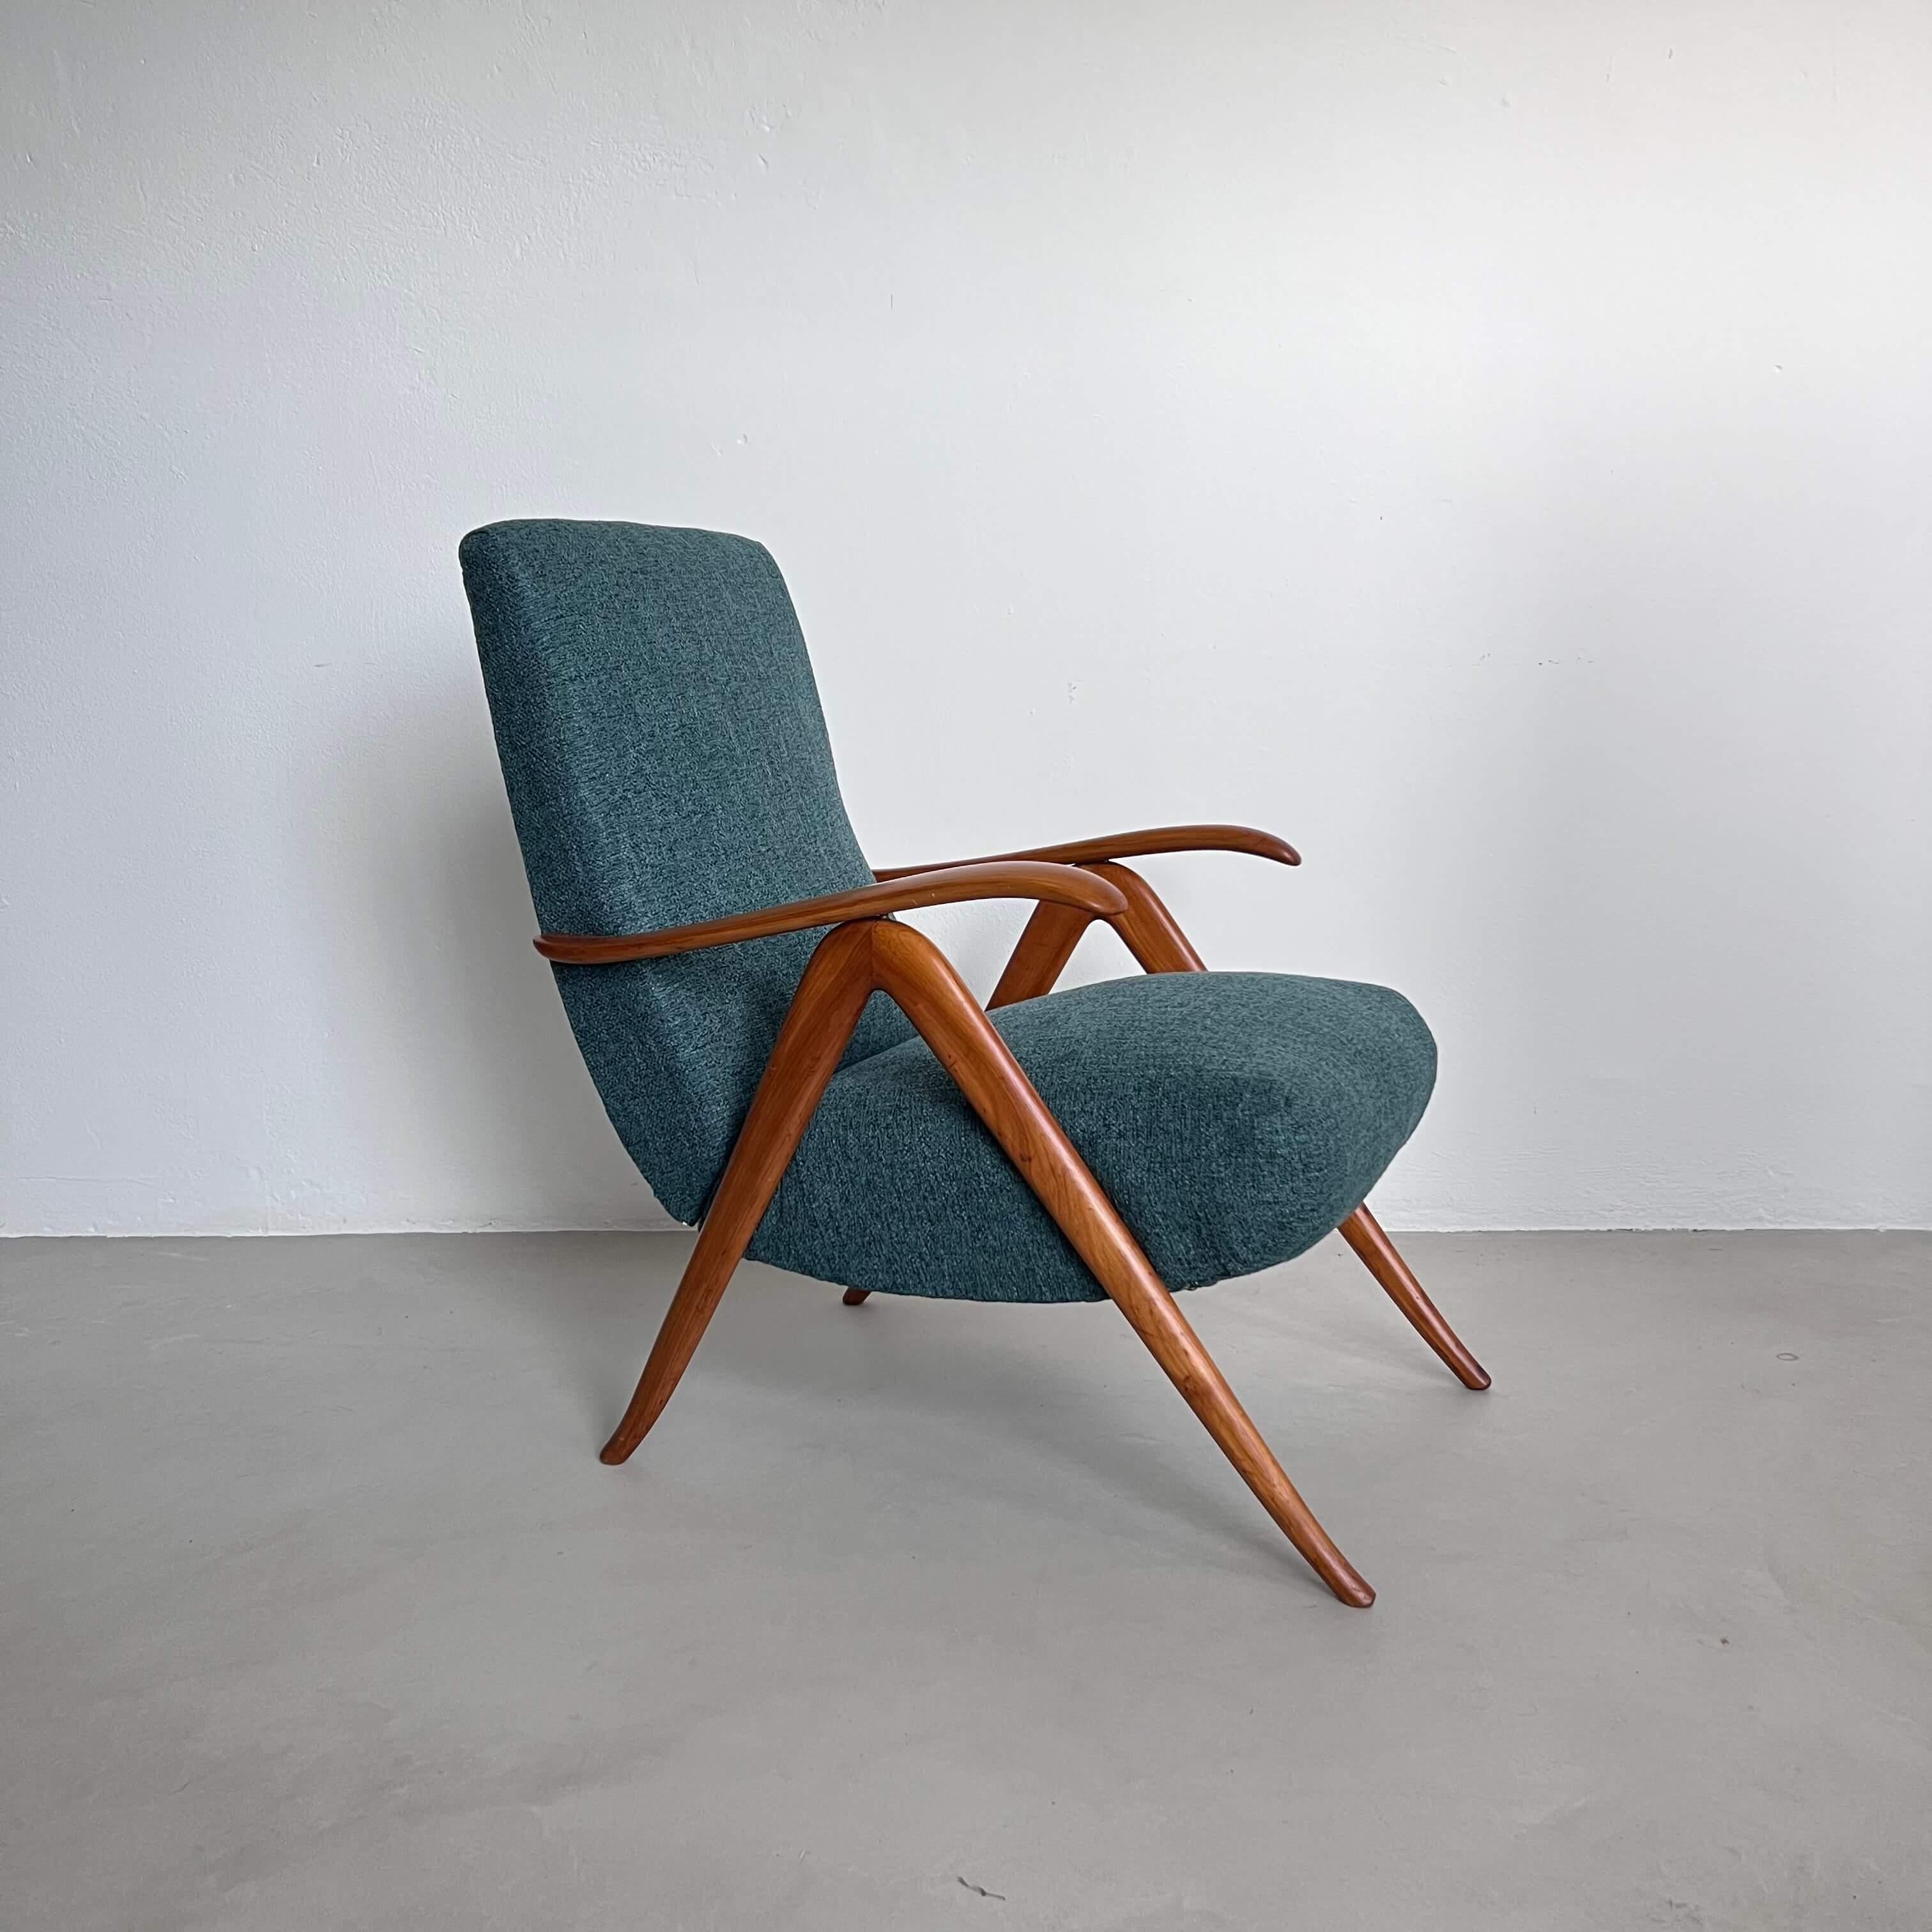 Two vintage Italian armchairs, Mid-Century Modern 1960’s , with wooden frame and petrol green fabric upholstery. They are unsigned and unlabeled but have nods to the style of Guglielmo Ullrich. Most likely made in Italy, they are nicely crafted,